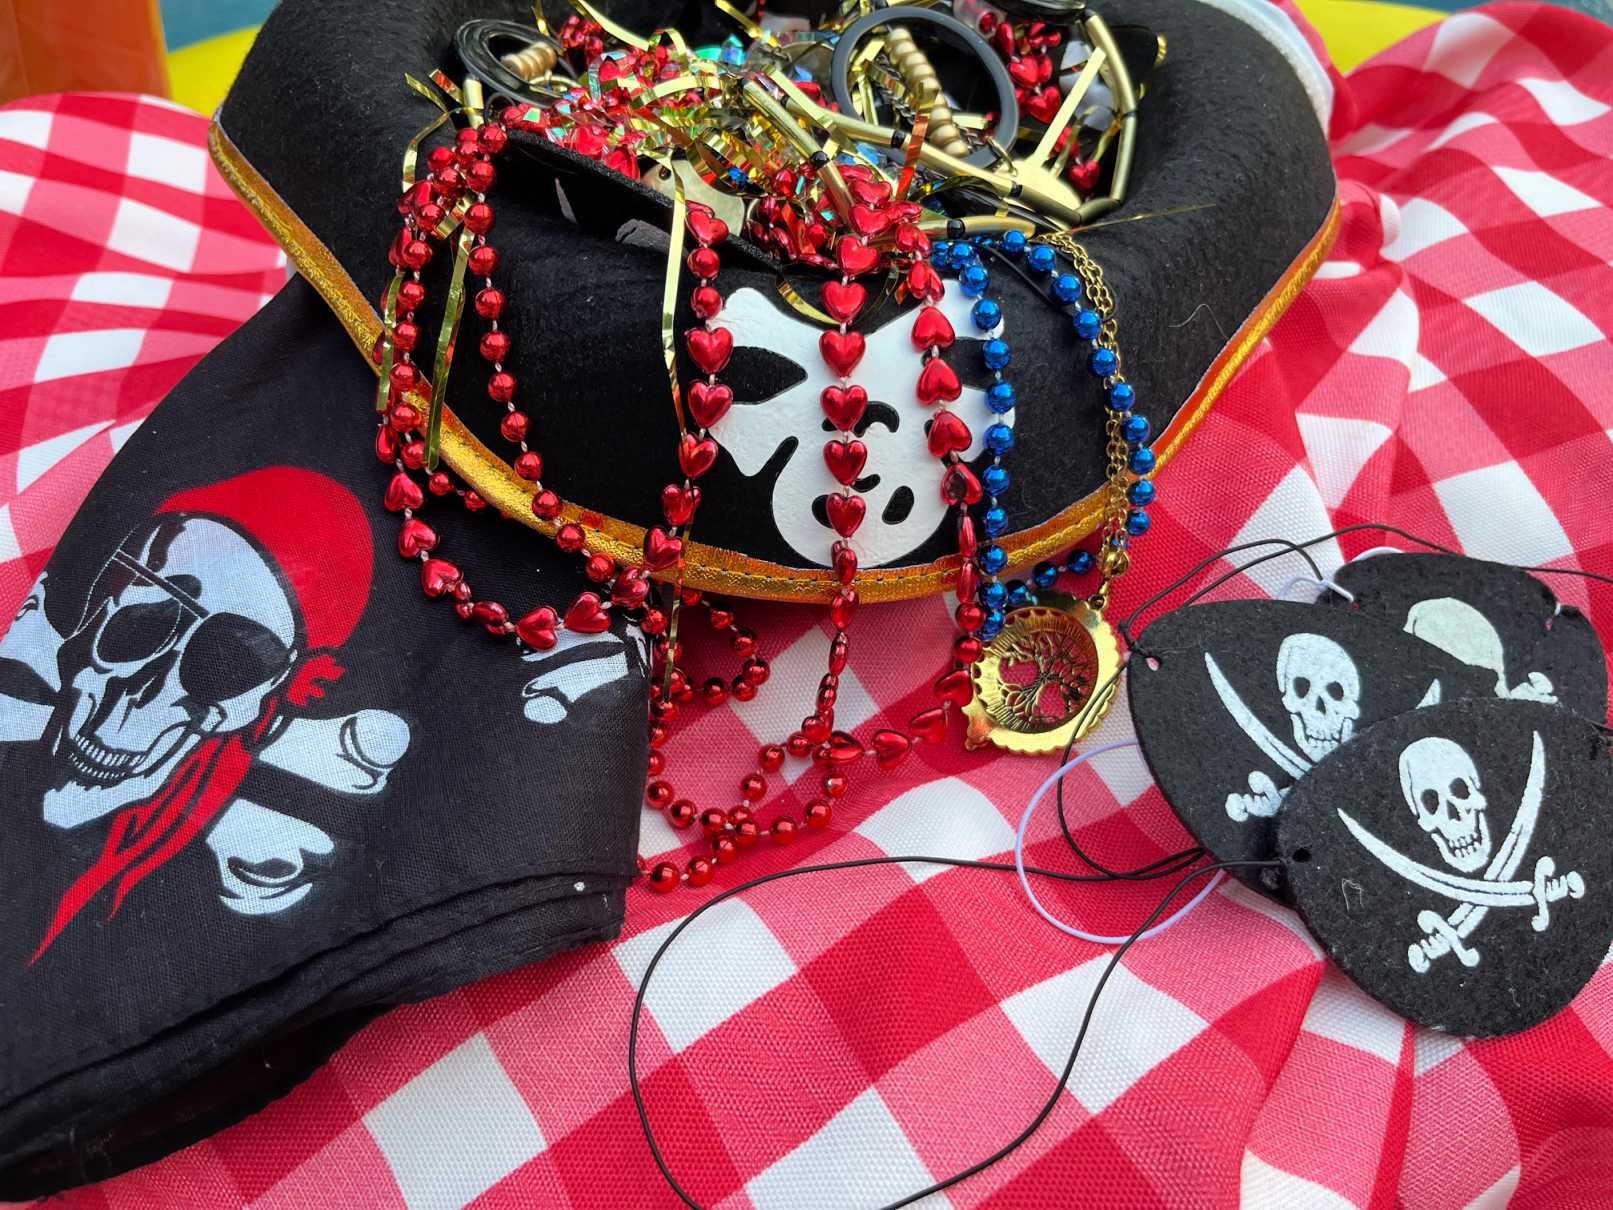 pirate hat filled with jewelry and pirate eye patches and bandanas